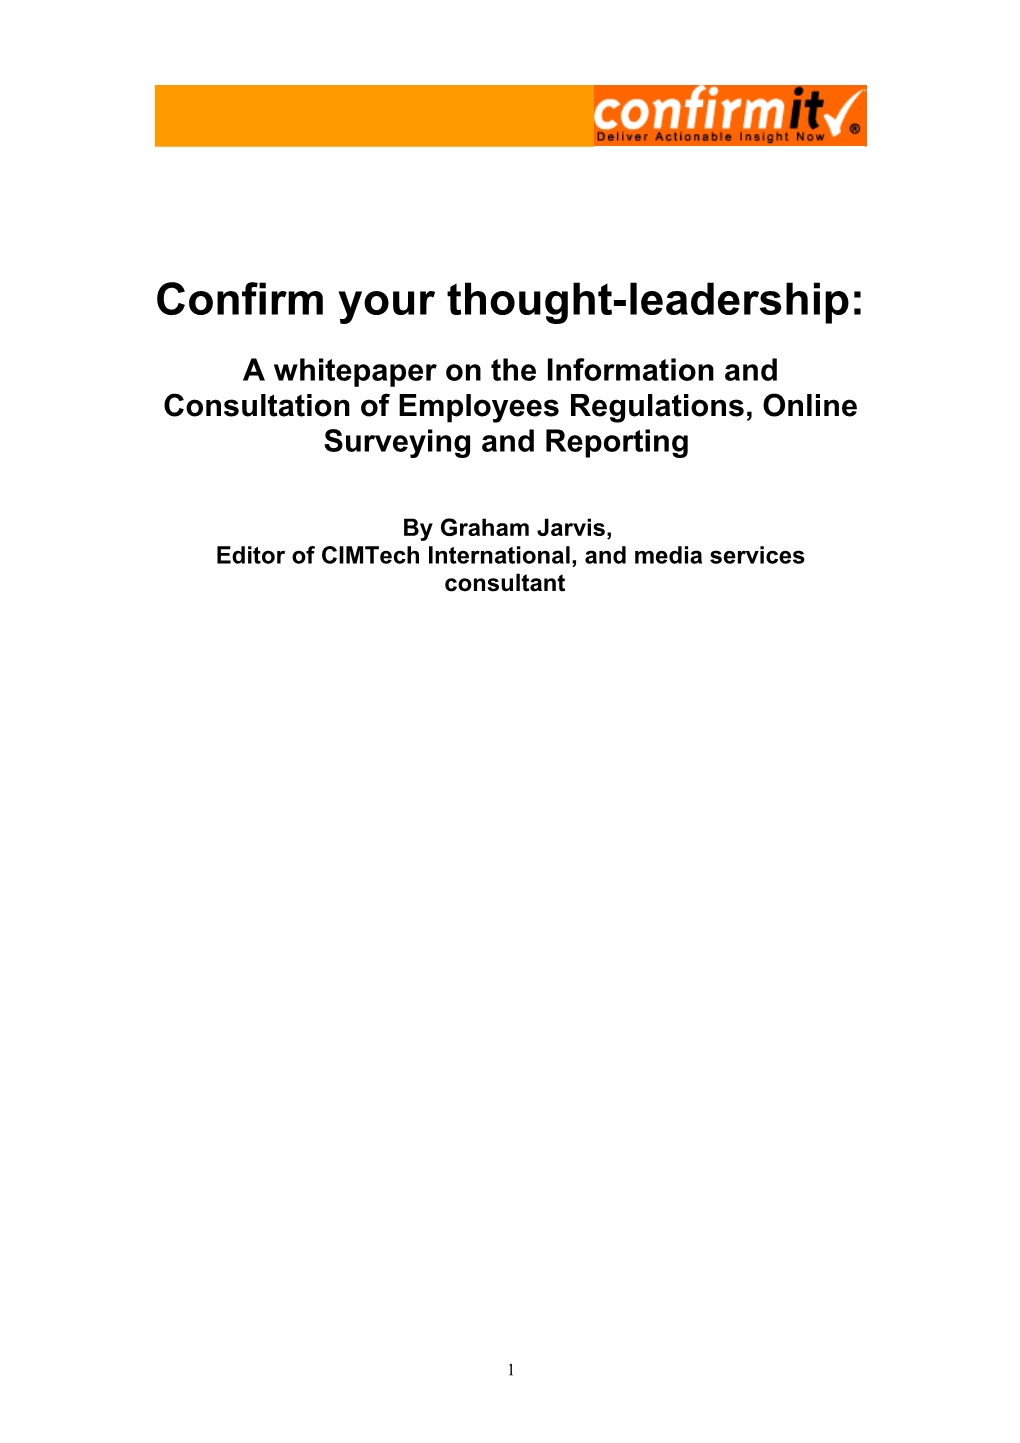 Confirm Your Thought-Leadership